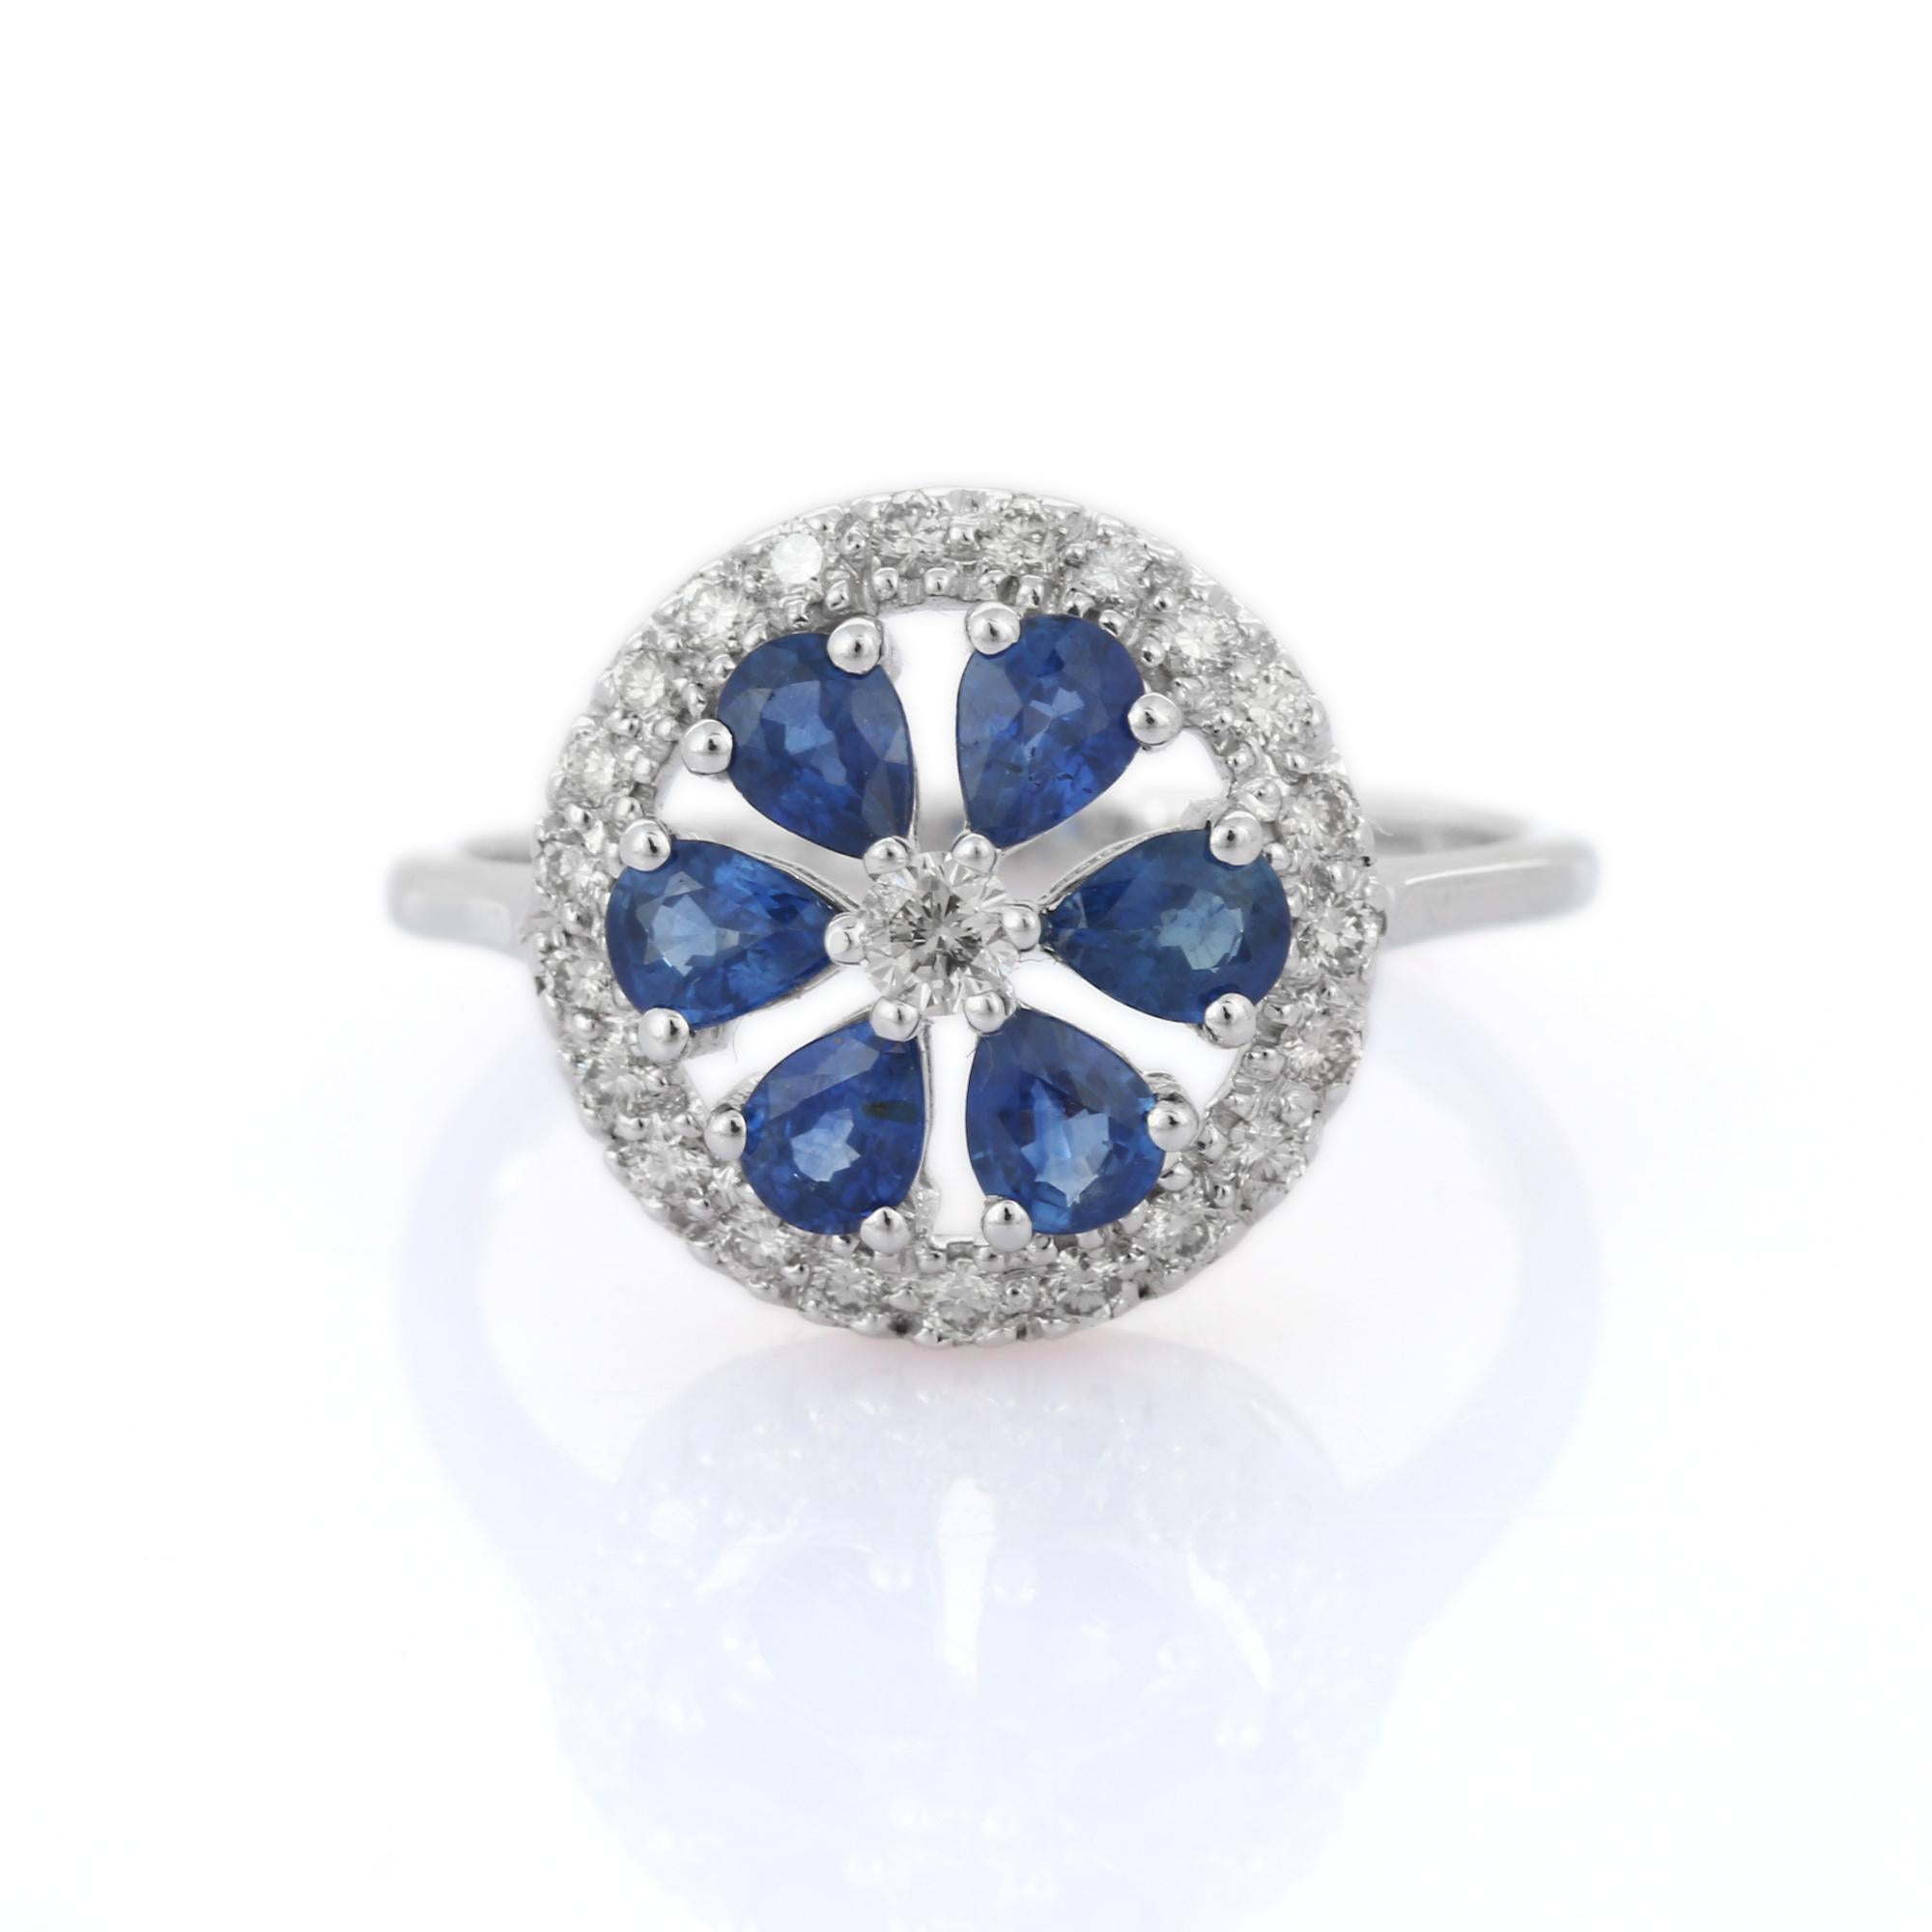 For Sale:  Estate 14k Solid White Gold Diamond and Blue Sapphire Flower Cocktail Ring 2